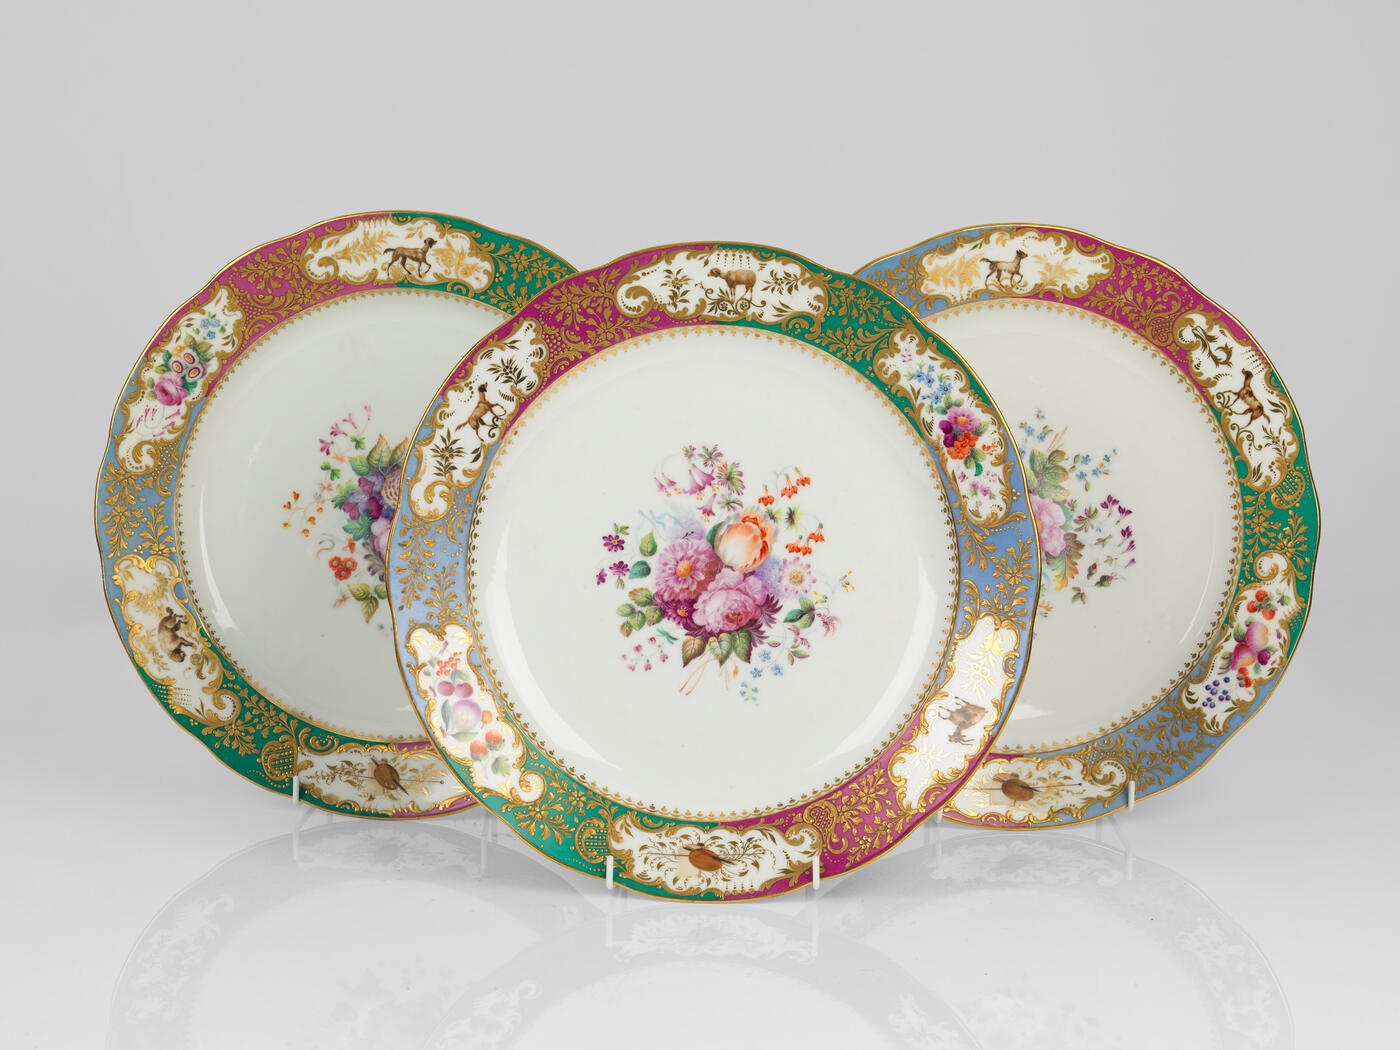 A Set of Three Porcelain Serving Platters from the Grand Duke Mikhail Pavlovich Service